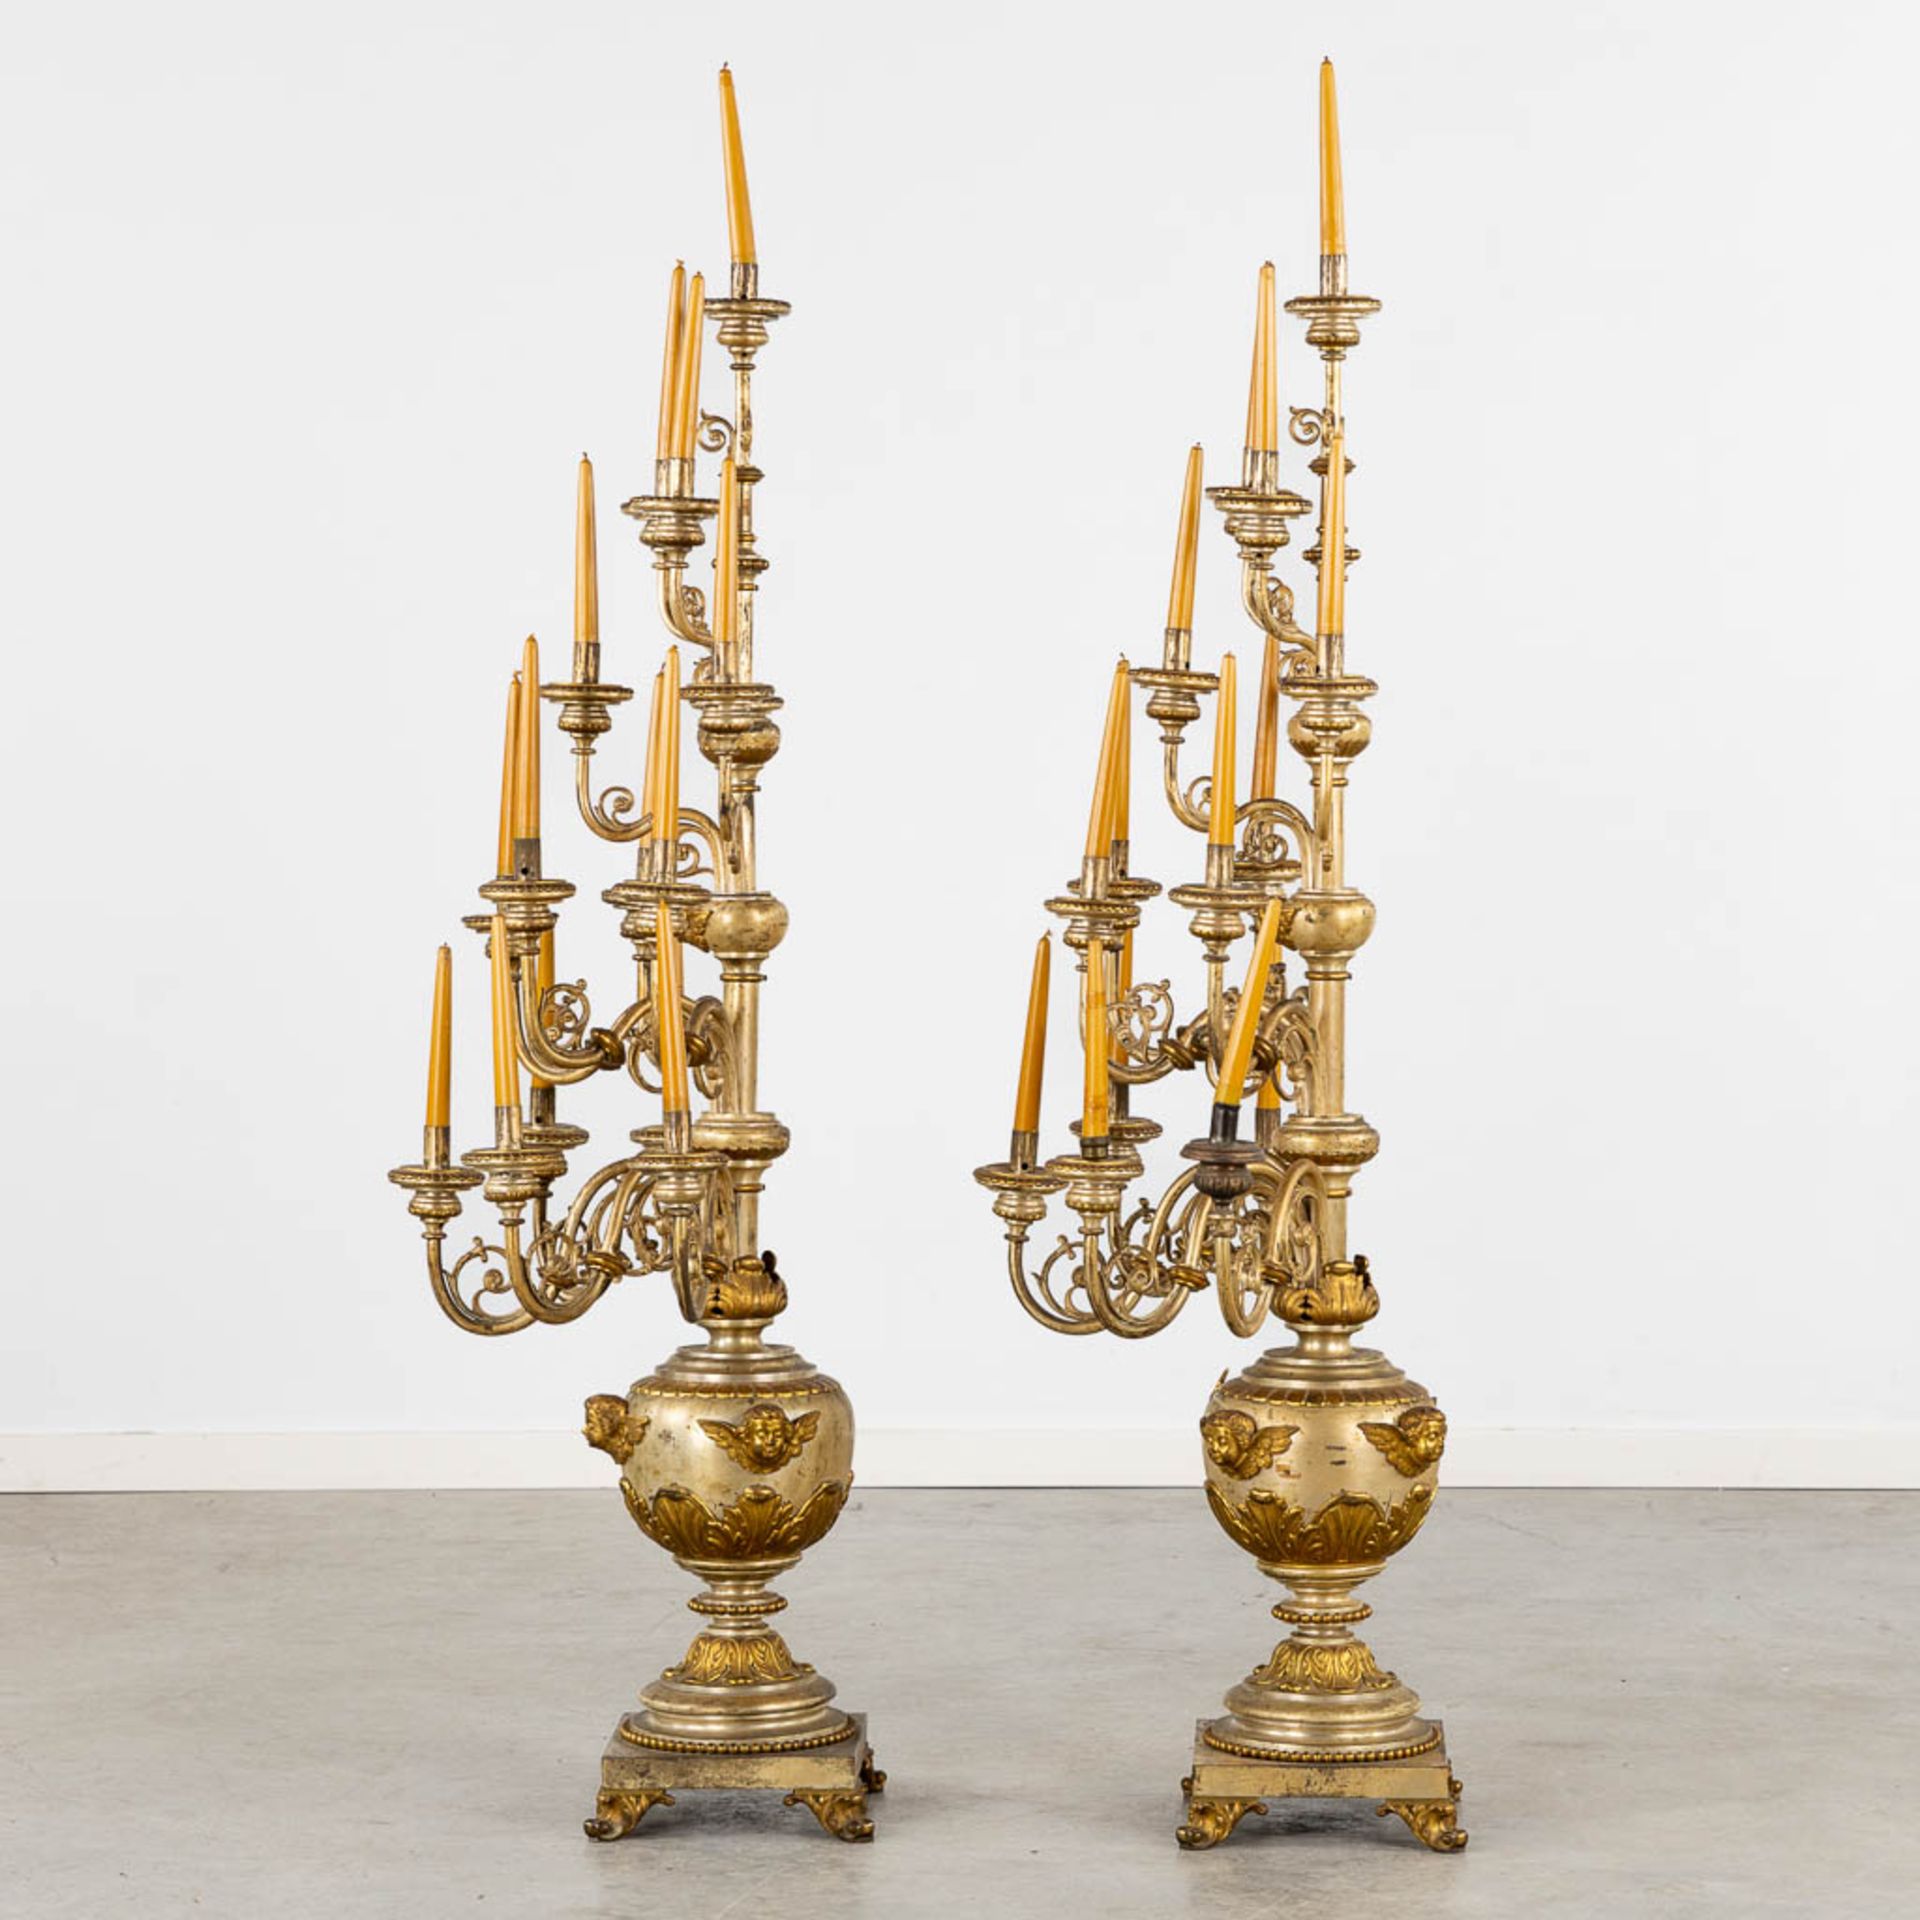 An impressive pair of candelabra, 15 candles, gold and silver-plated metal. (L:44 x W:60 x H:138 cm) - Bild 4 aus 12